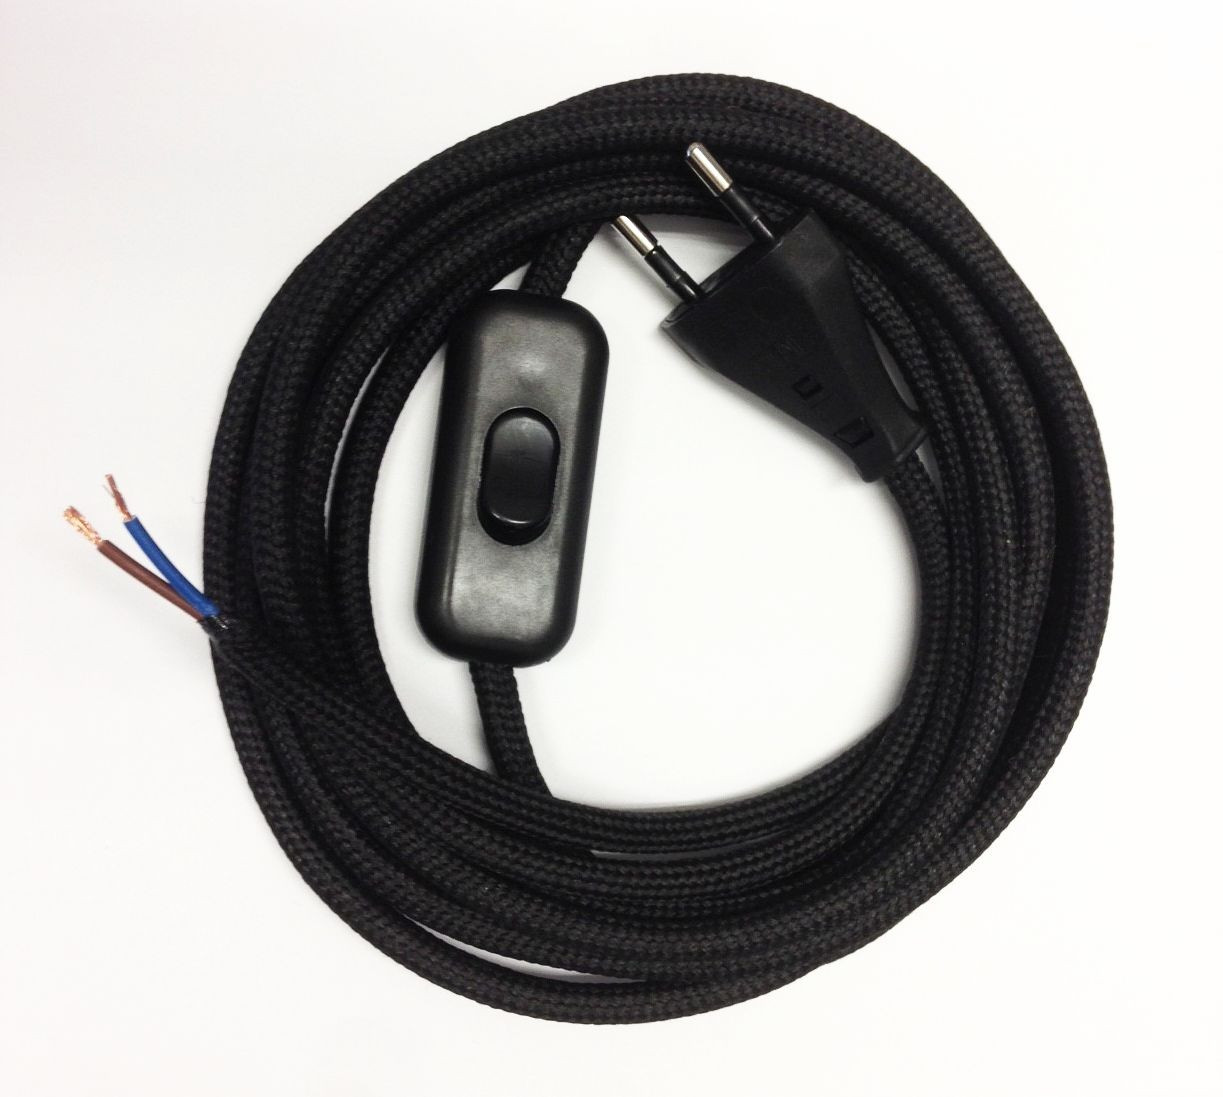 Assembled Supply Cord with Plug and Inline Cord Switch Black 2 Core